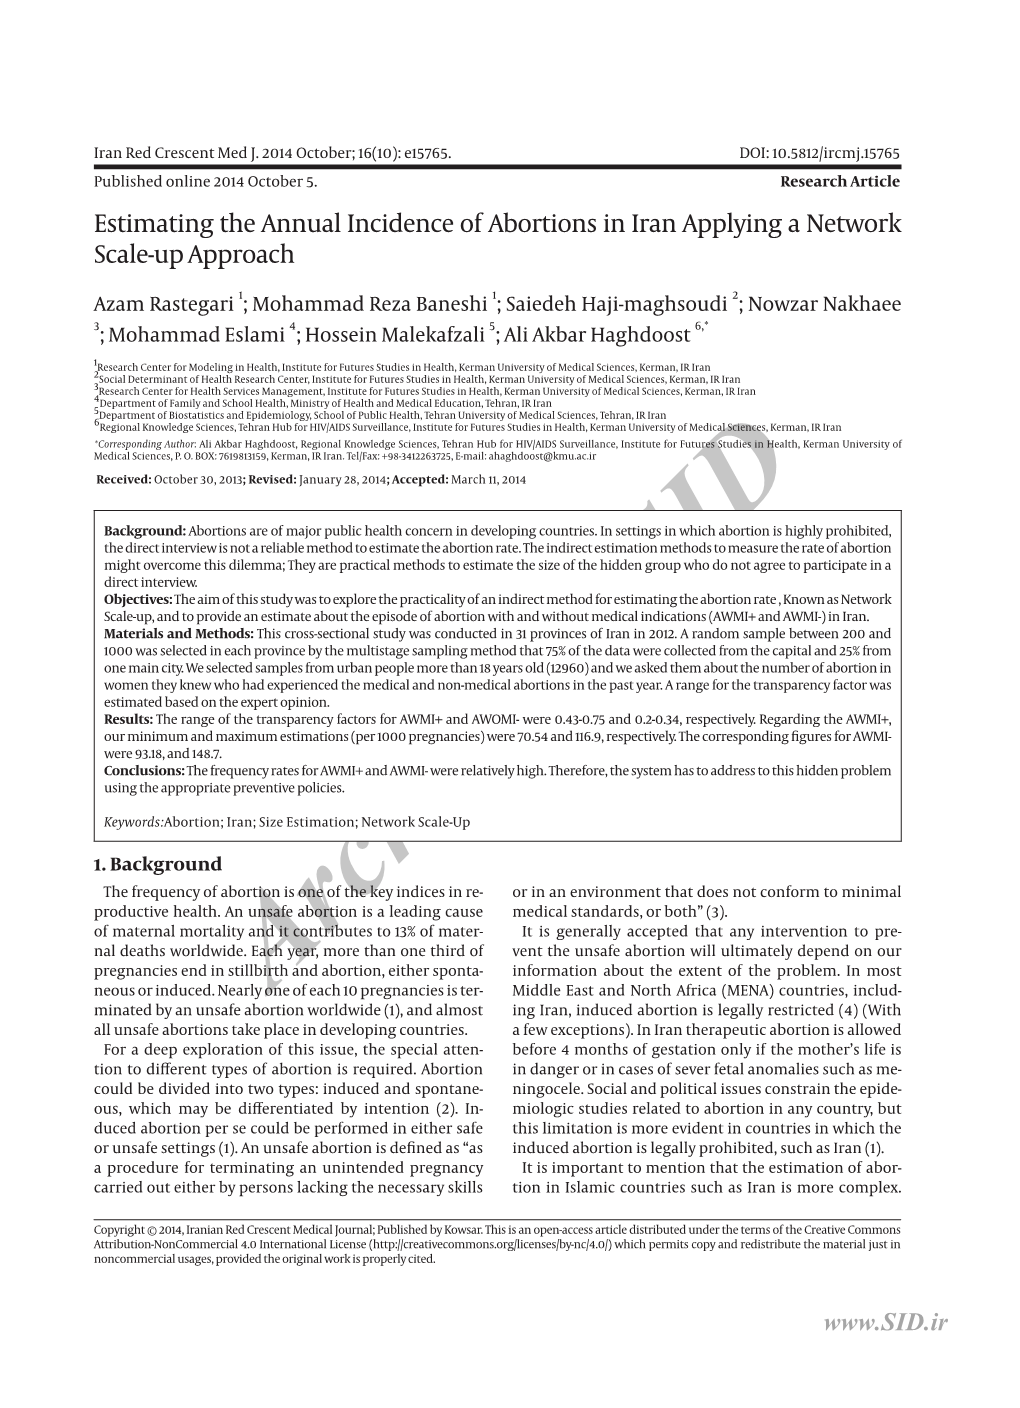 Estimating the Annual Incidence of Abortions in Iran Applying a Network Scale-Up Approach